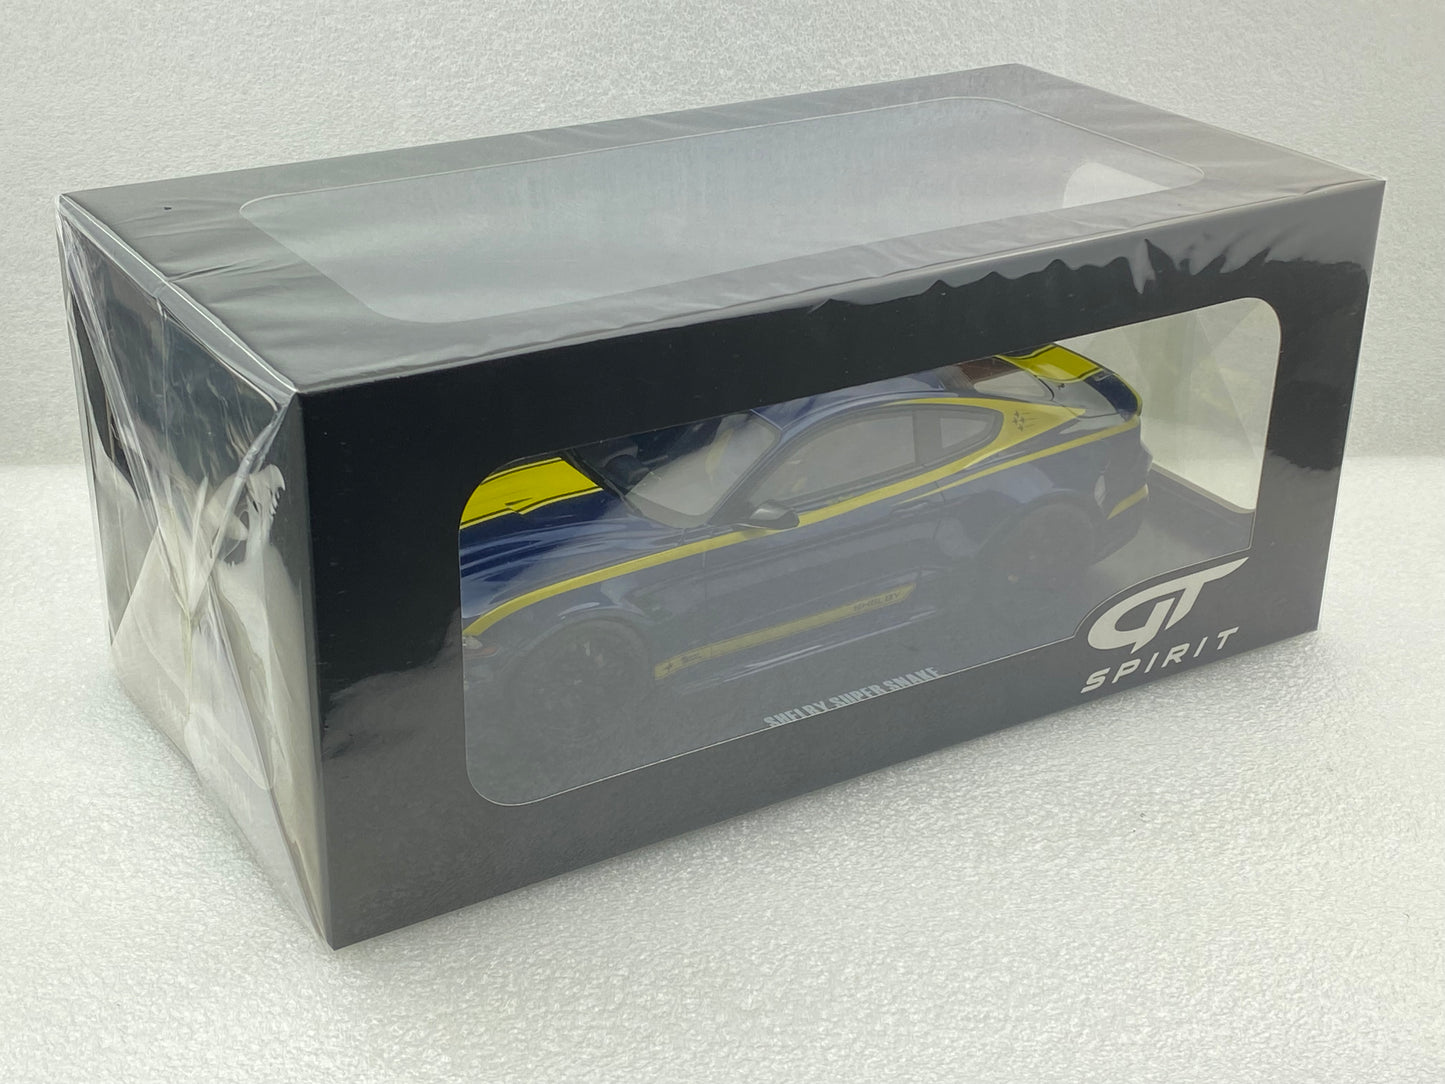 GT Spirit 1:18 Ford Shelby Mustang Super Snake Coupe 2021 GT871 (Clearance Final Sale)